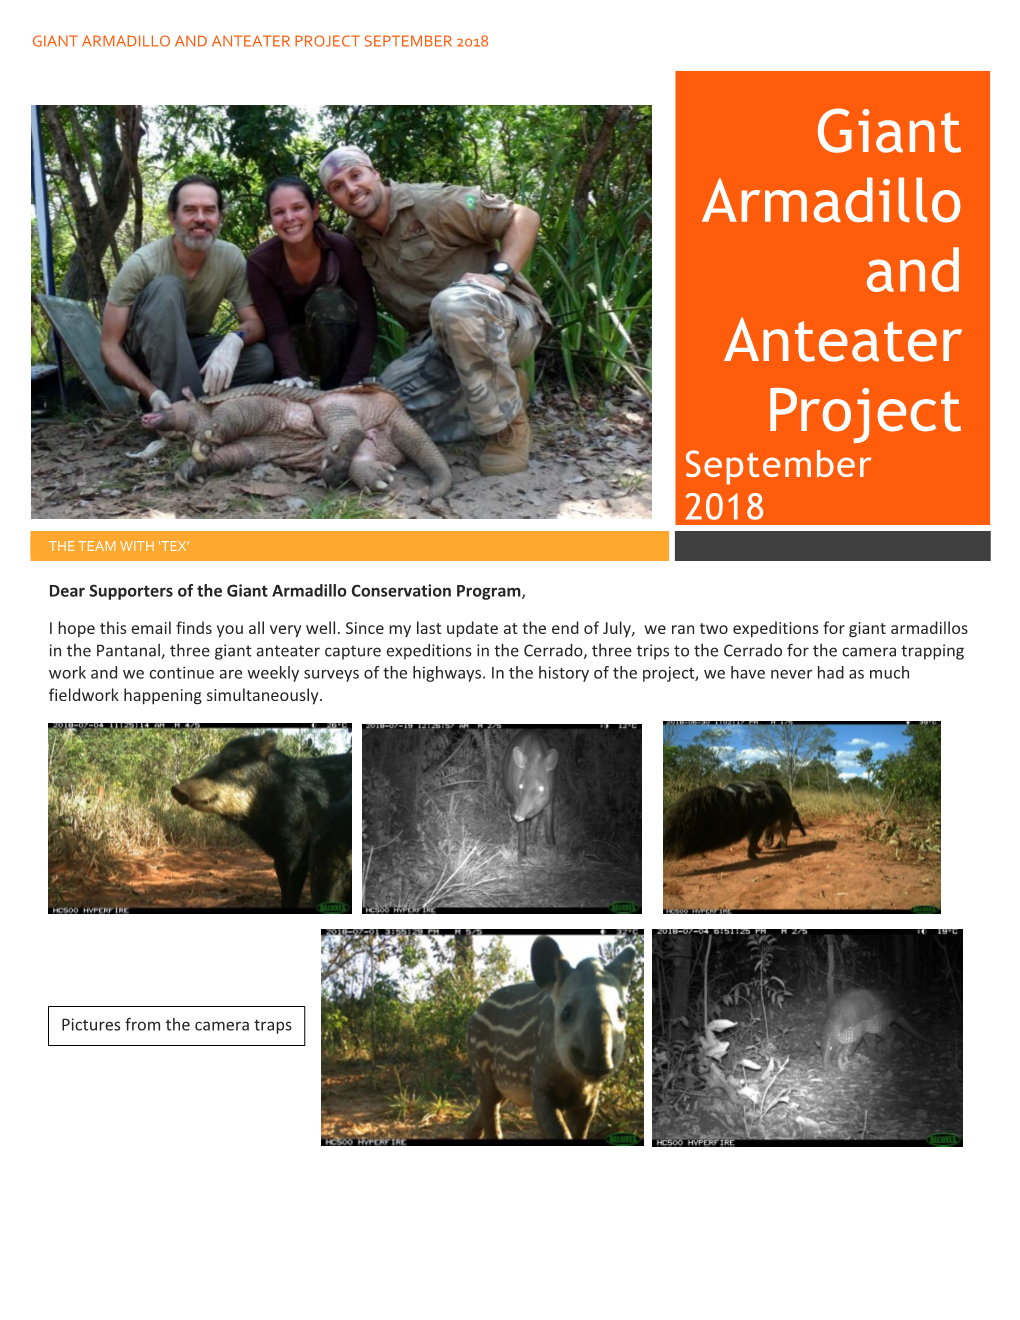 Giant Armadillo and Anteater Project September 2018